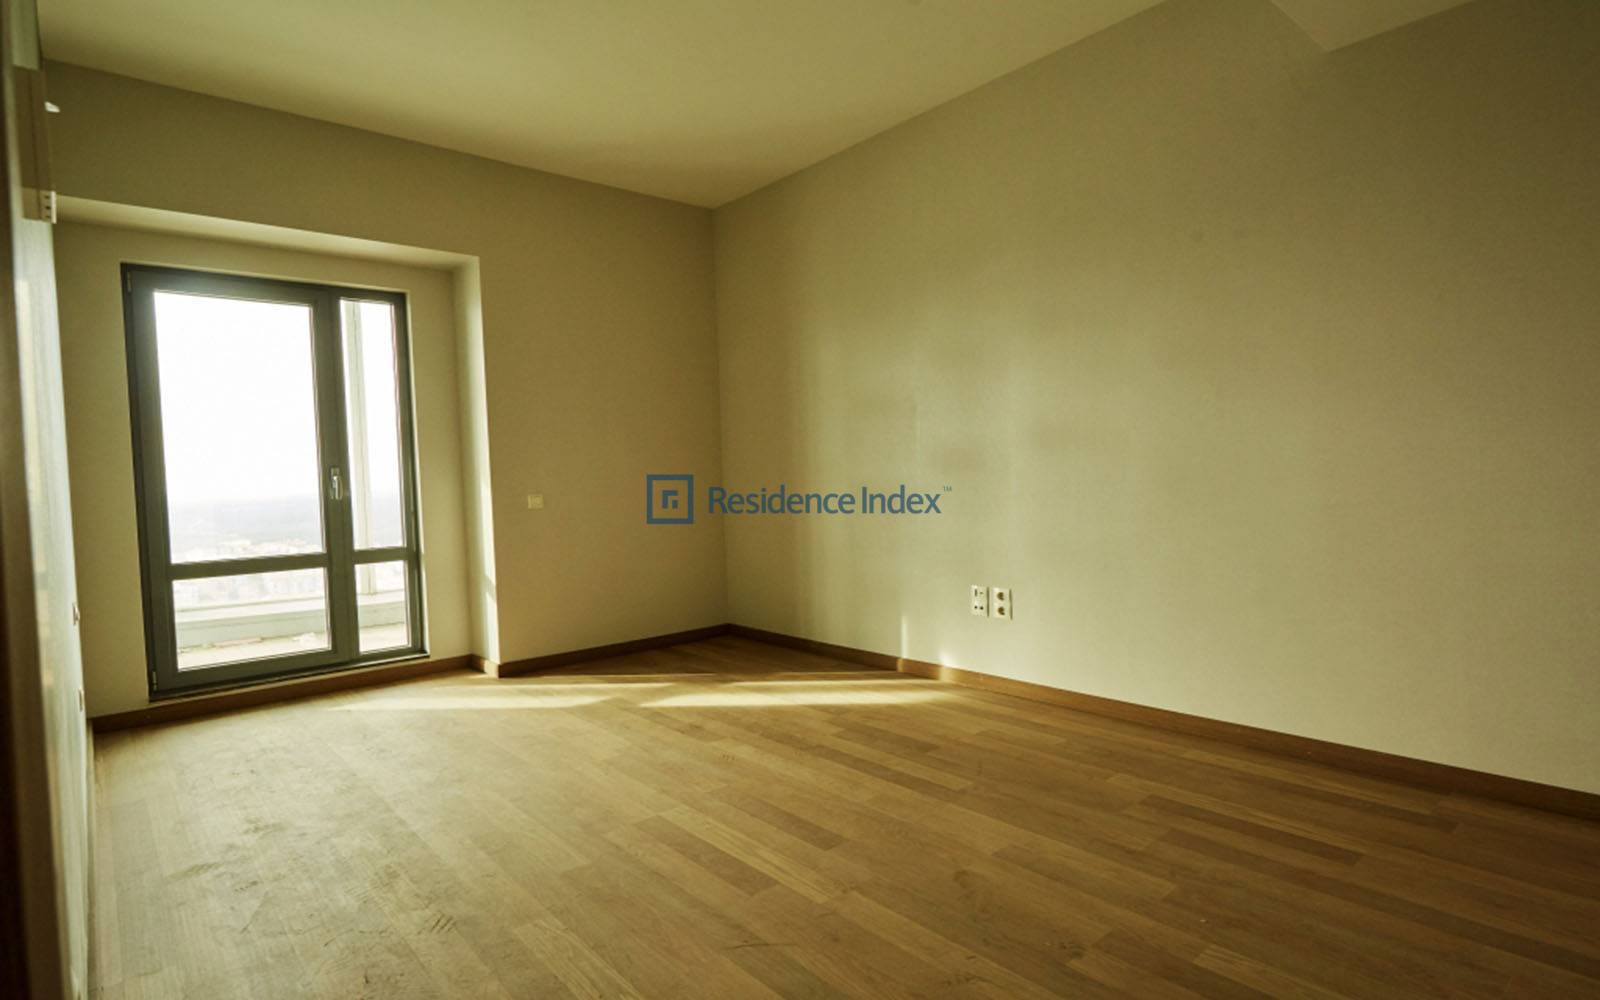 3 + 1 183 m2 Street Front Apartment for sale